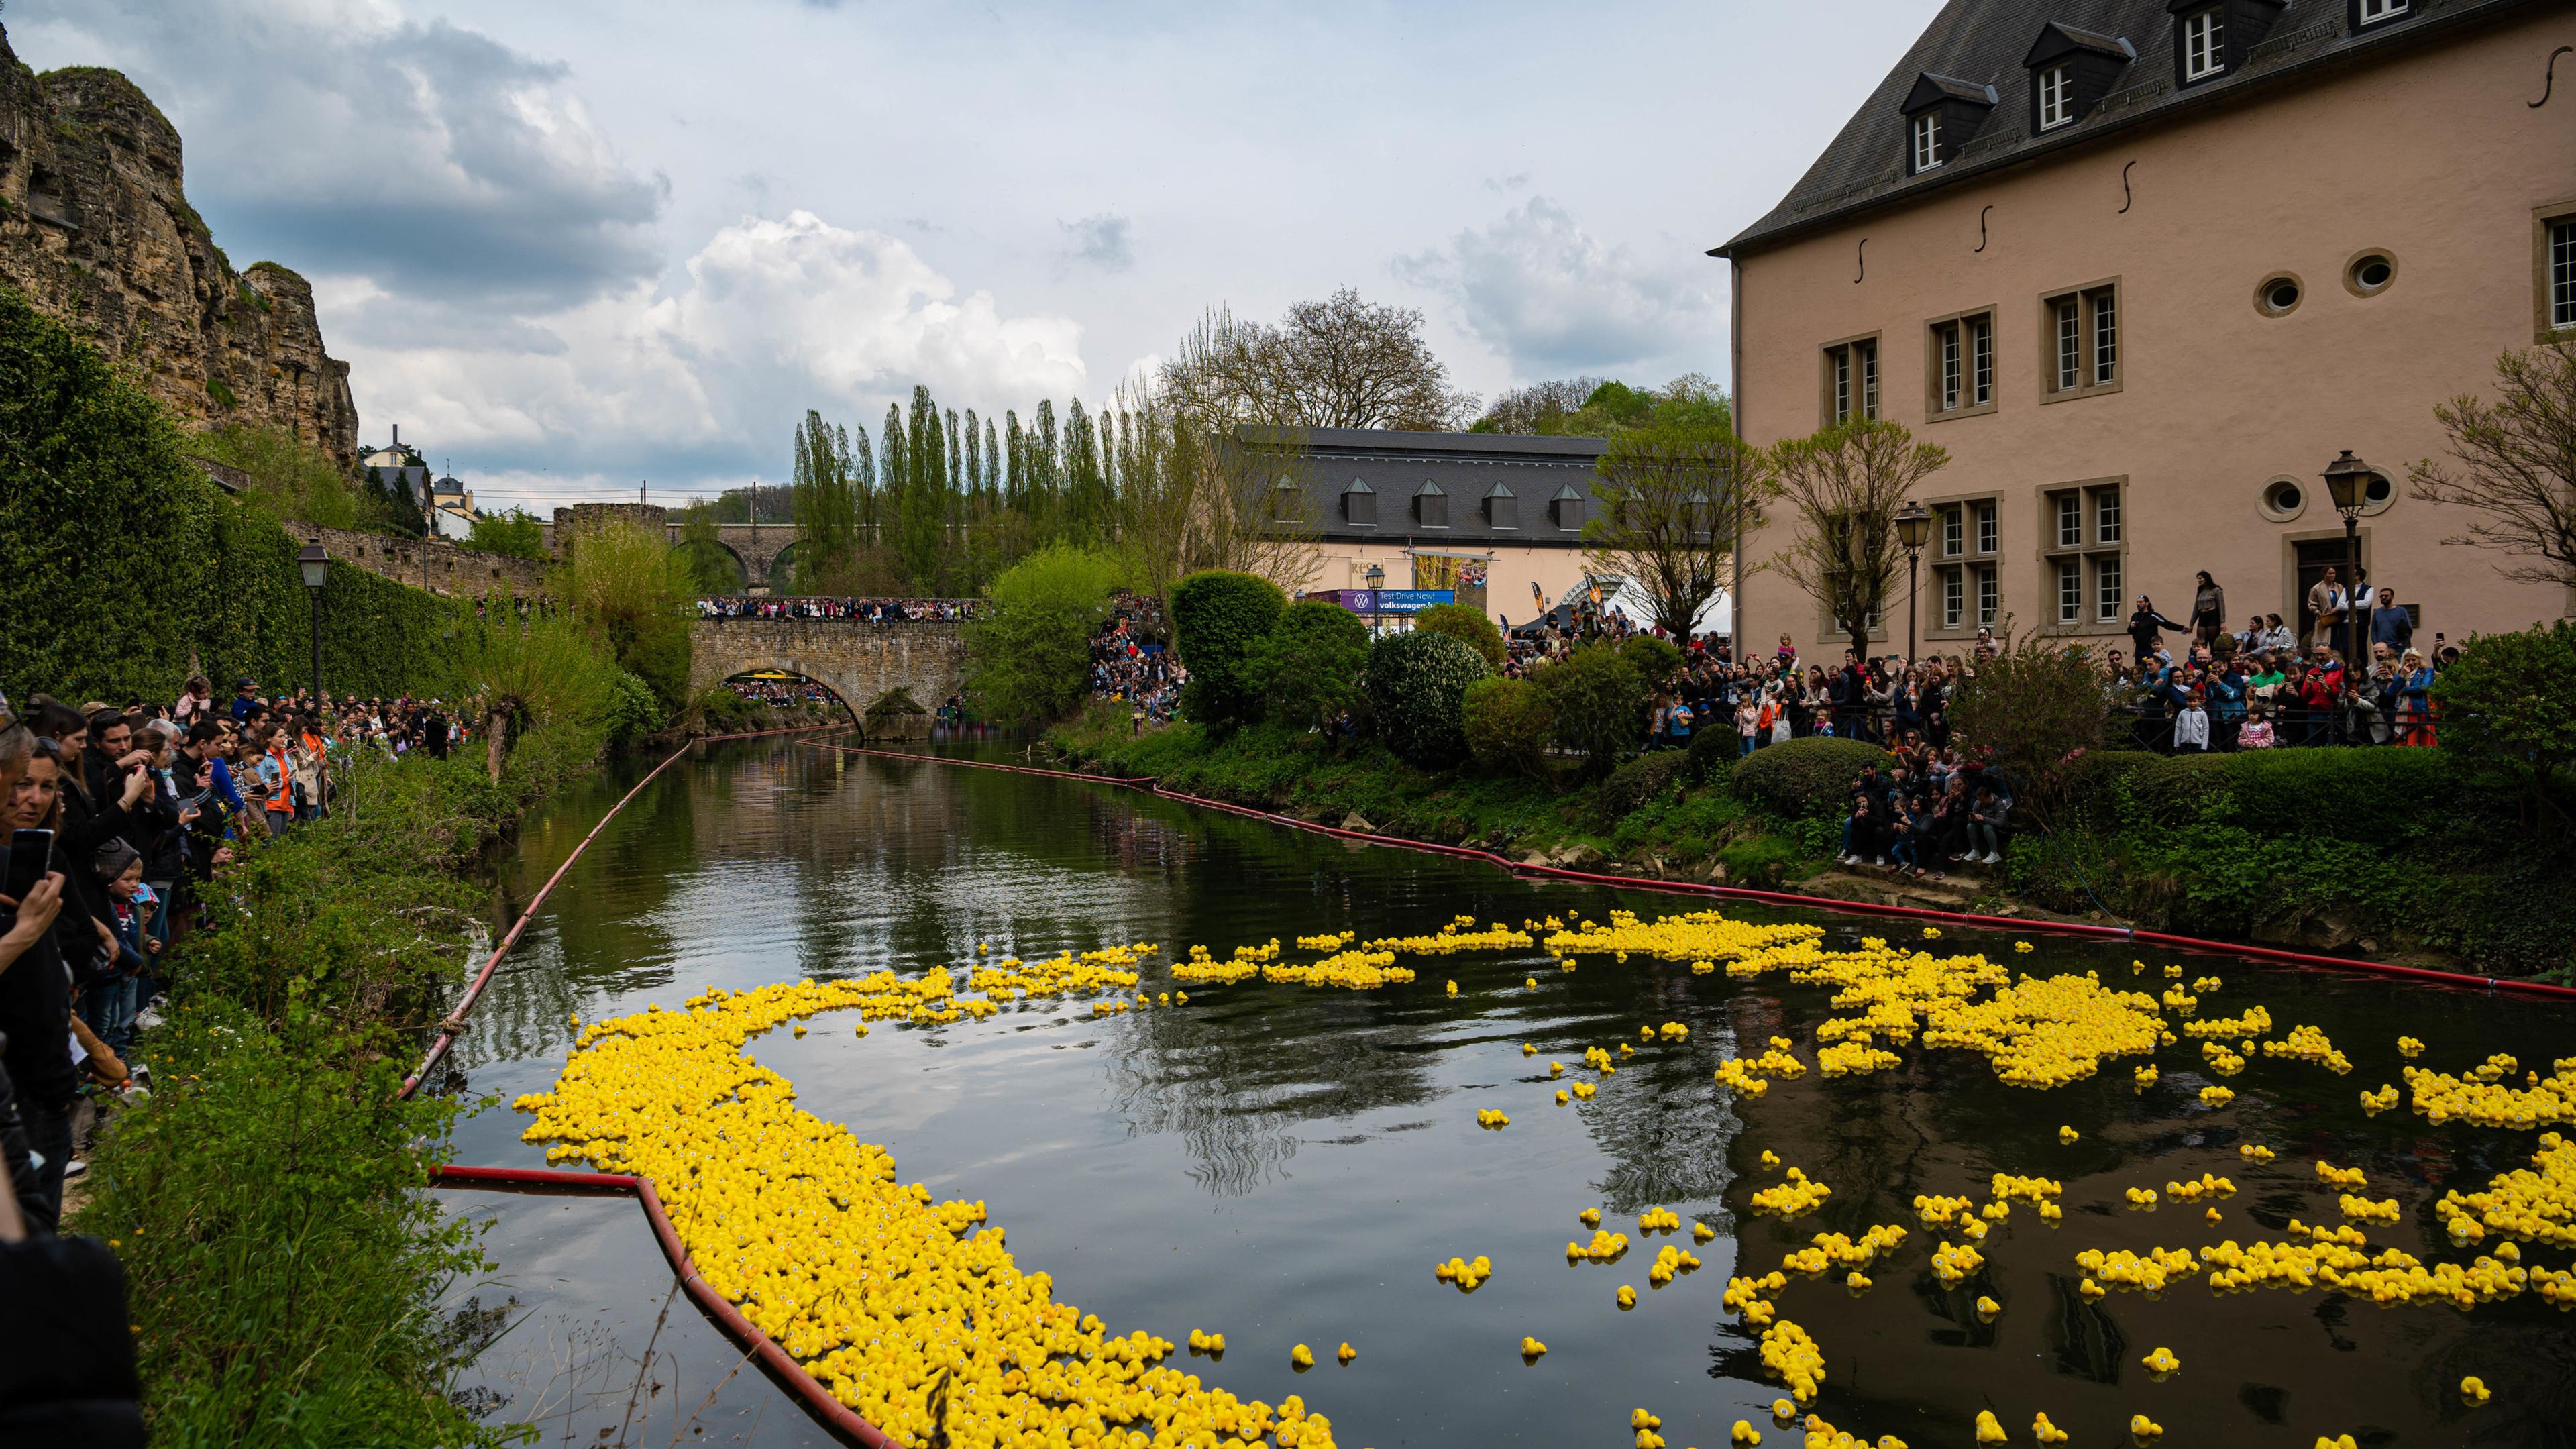 16,000 ducks will float down the River Alzette on Saturday 20 April 